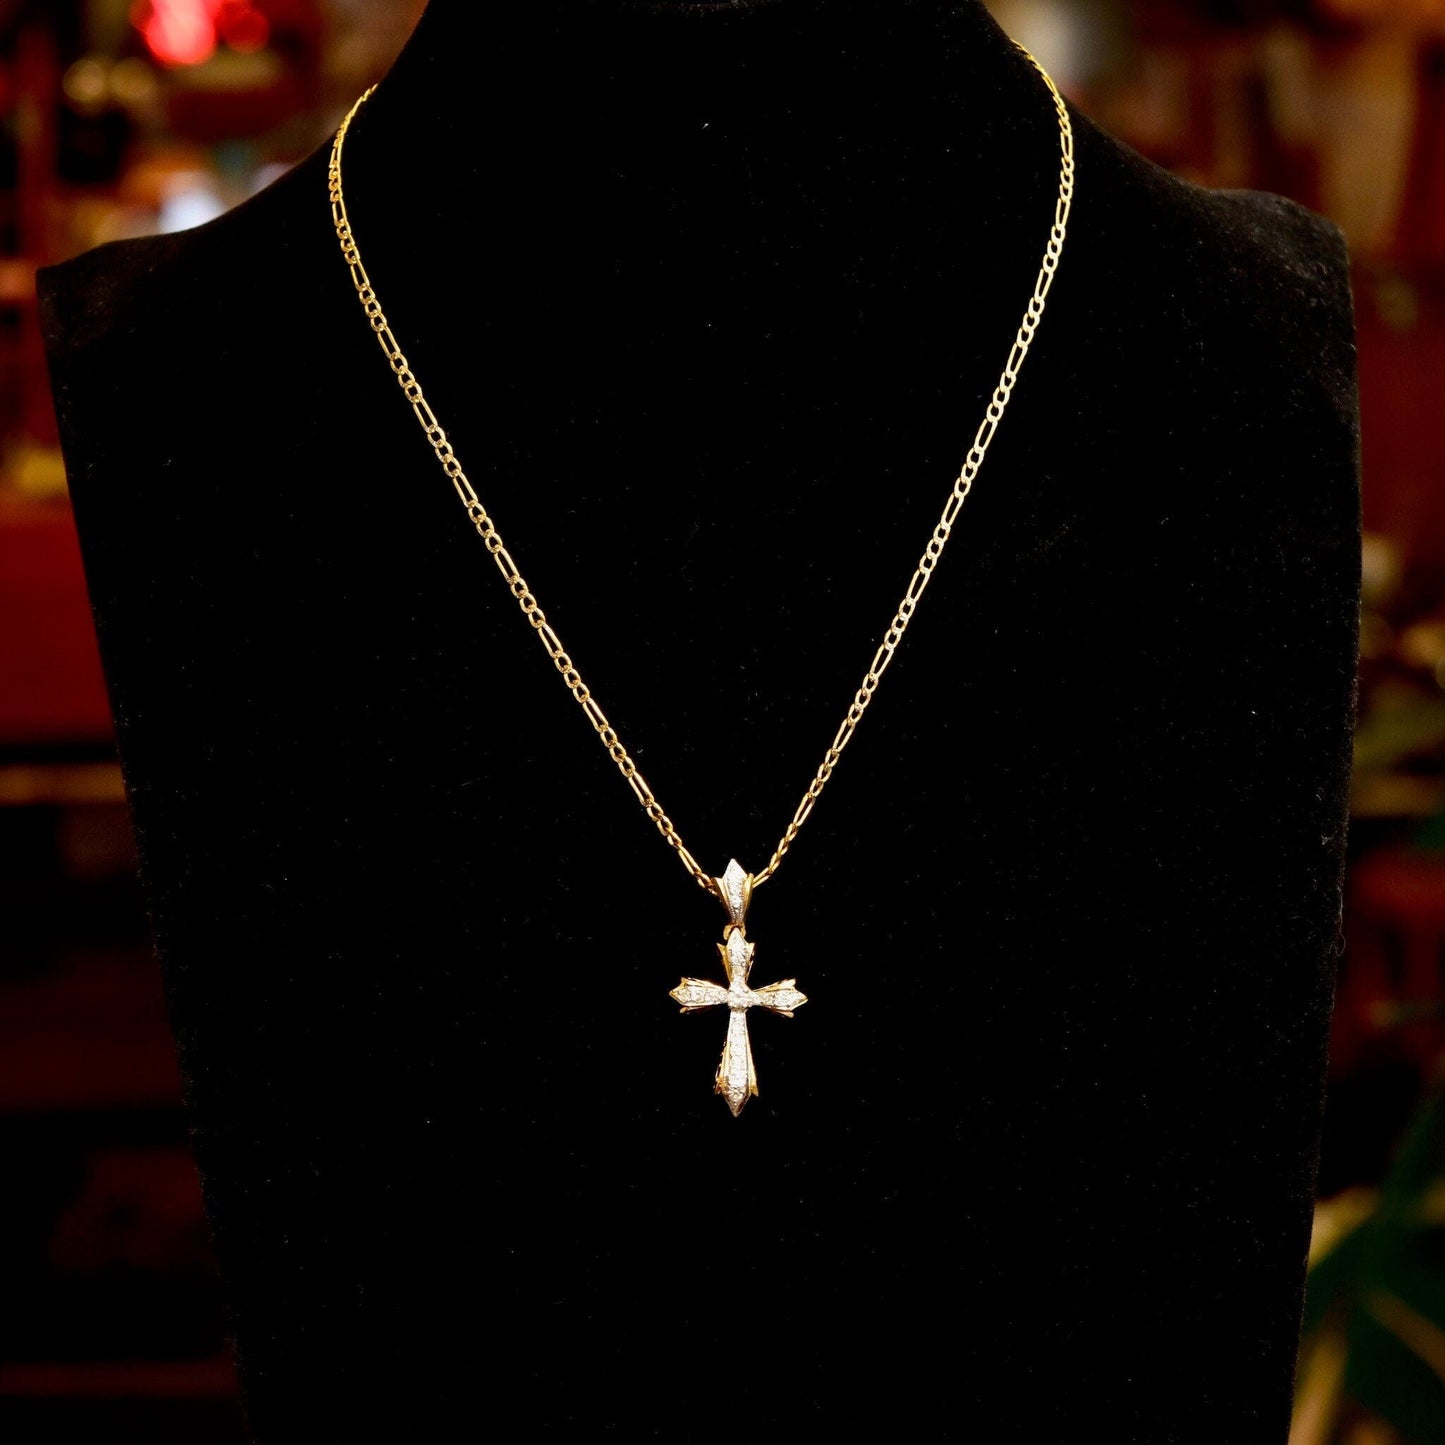 14K two-tone gold diamond pave gothic cross pendant necklace on diamond cut figaro chain, vintage religious jewelry, 16 inches long